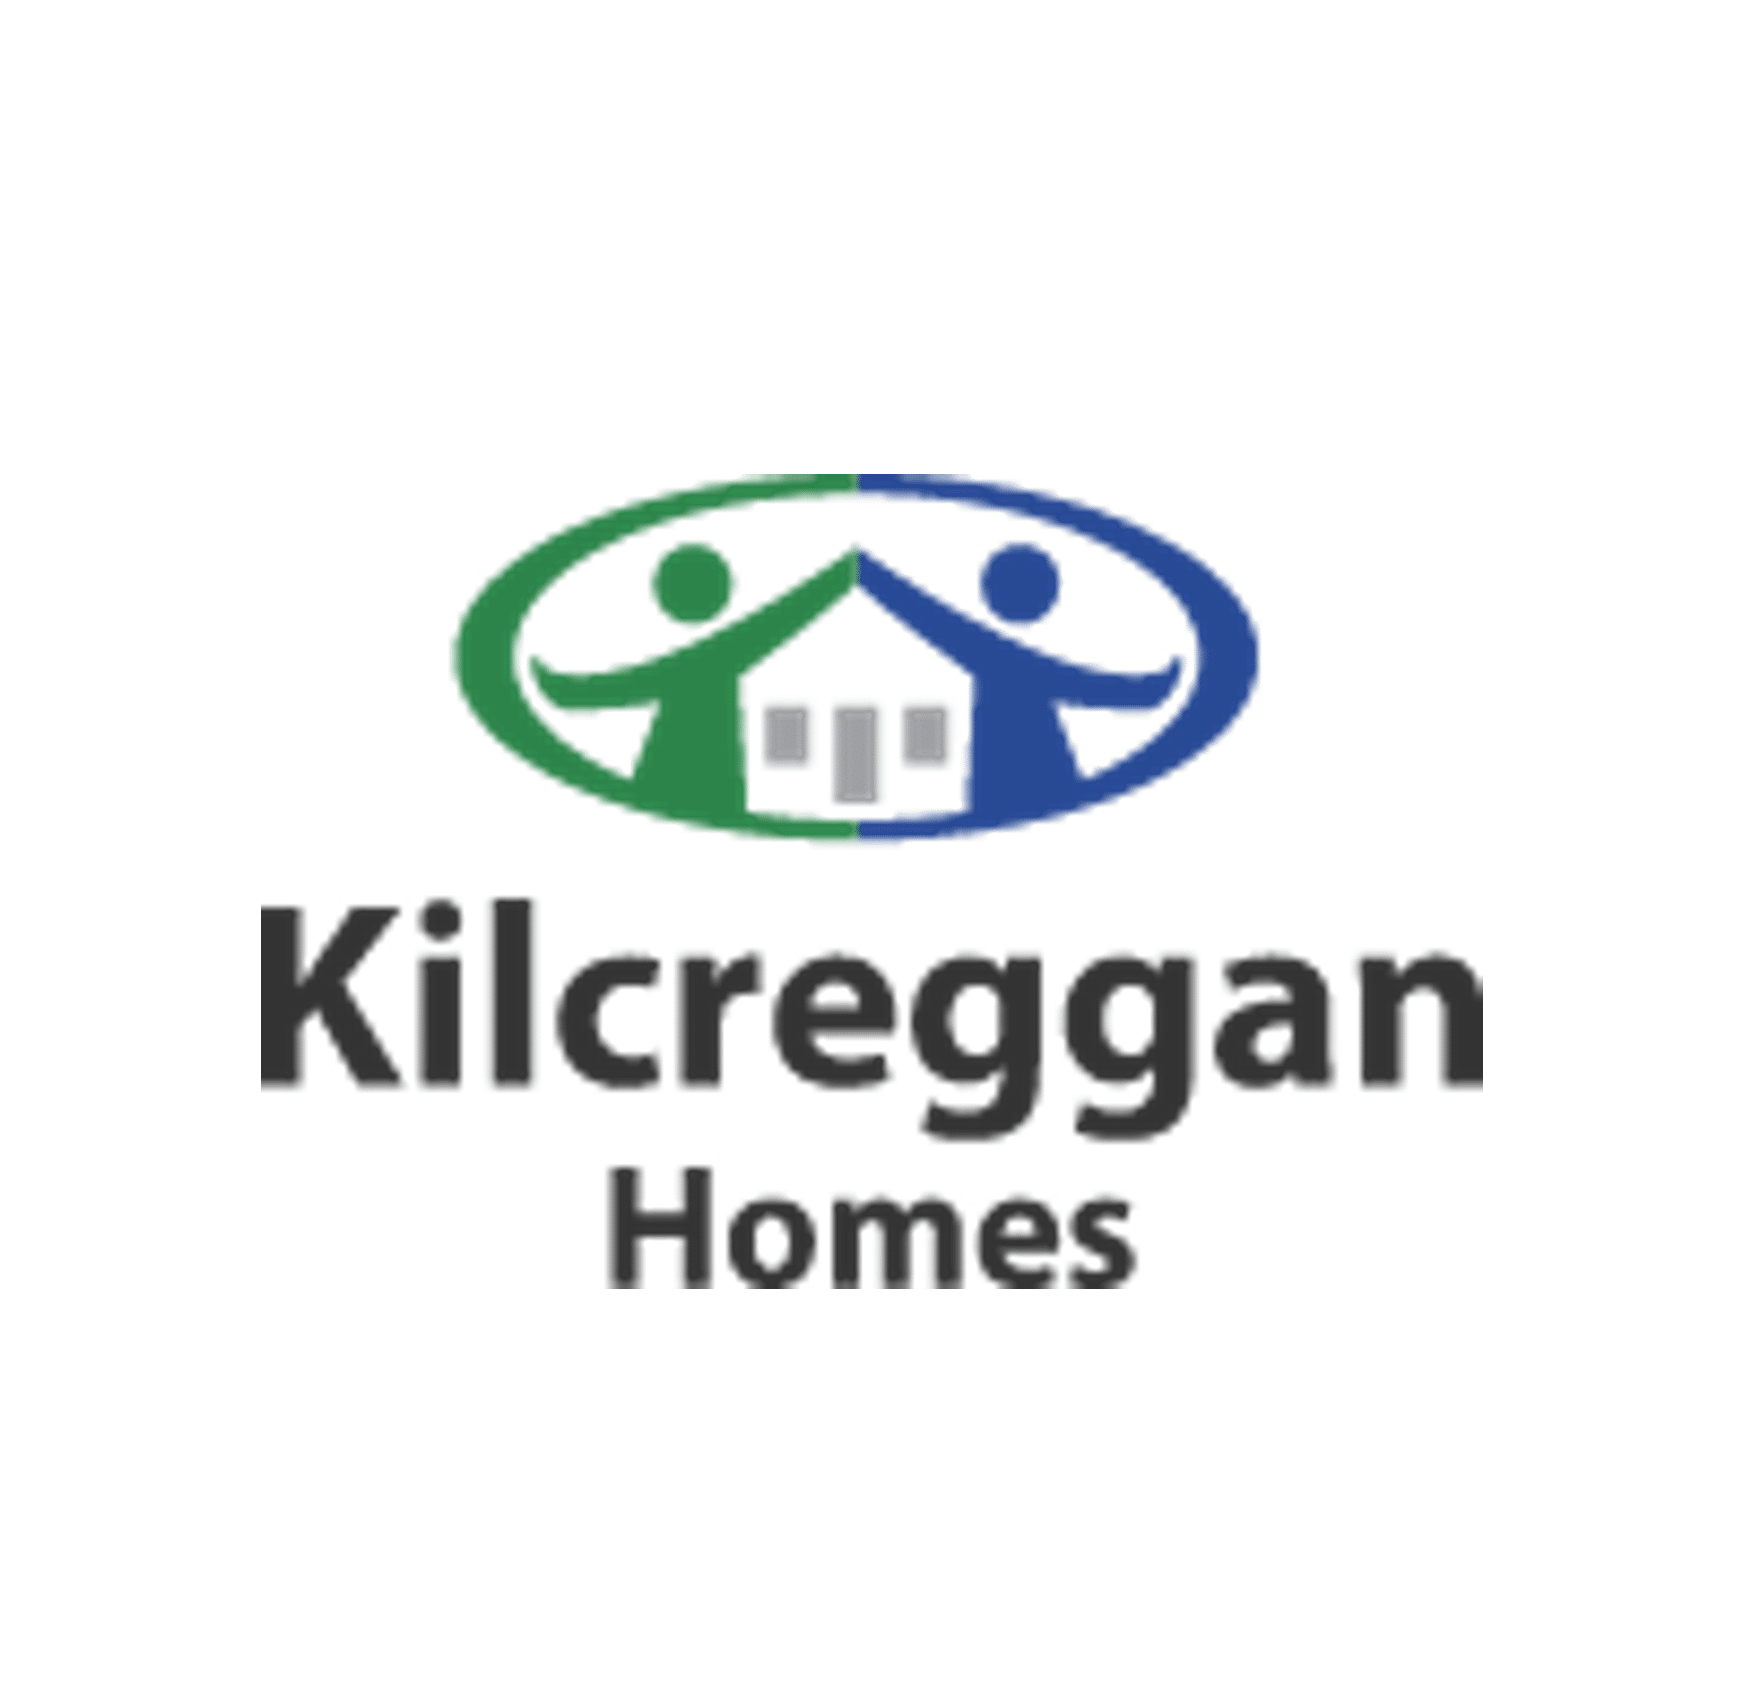 Logo of kilcreggan homes featuring a stylized house and two human figures within a circular outline, with the company name below.